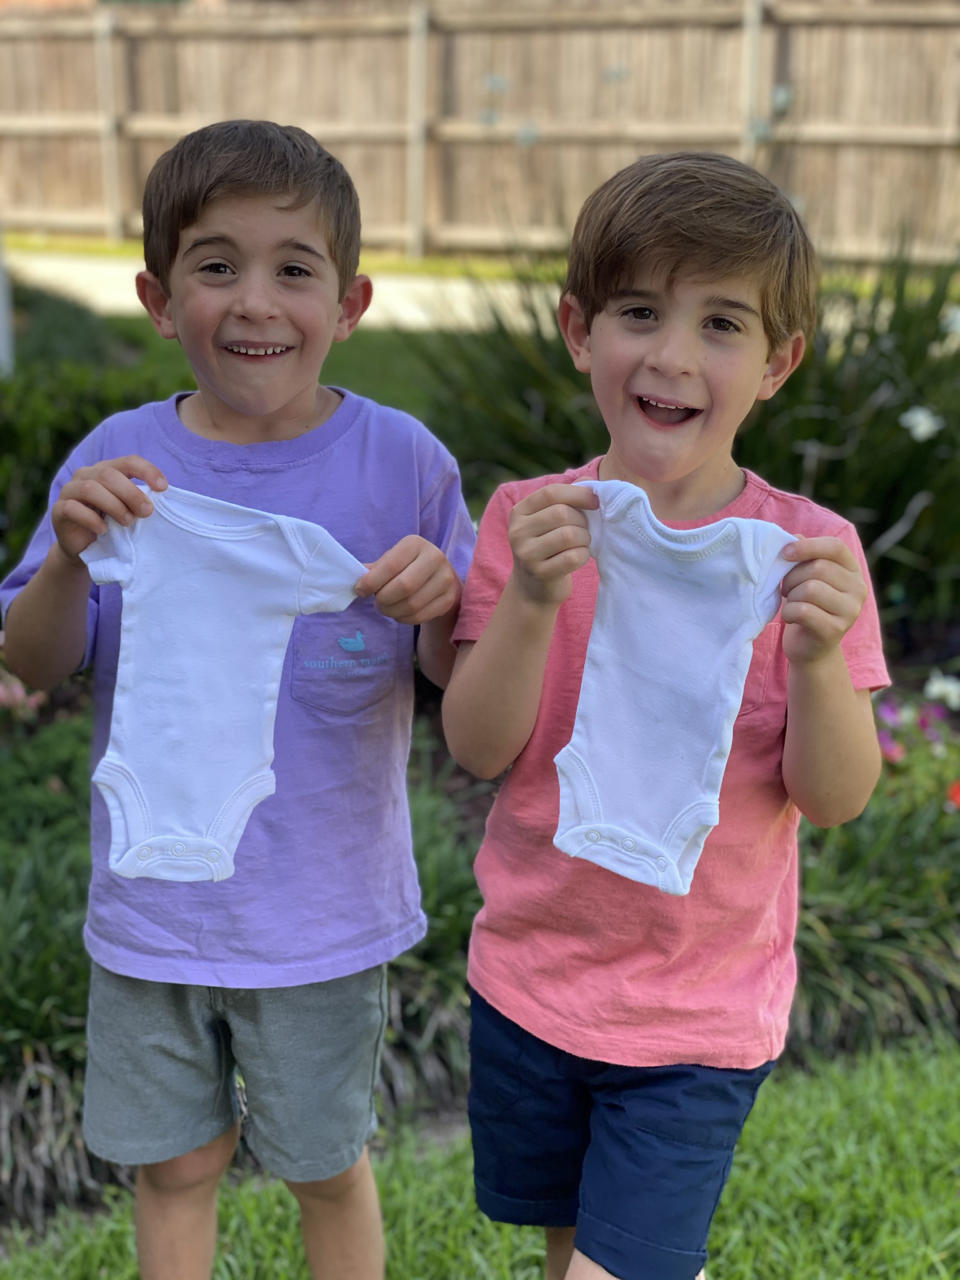 Identical twin brothers Grant and Cooper Credo welcomed identical twin sisters in September 2020. (Erin Credo)